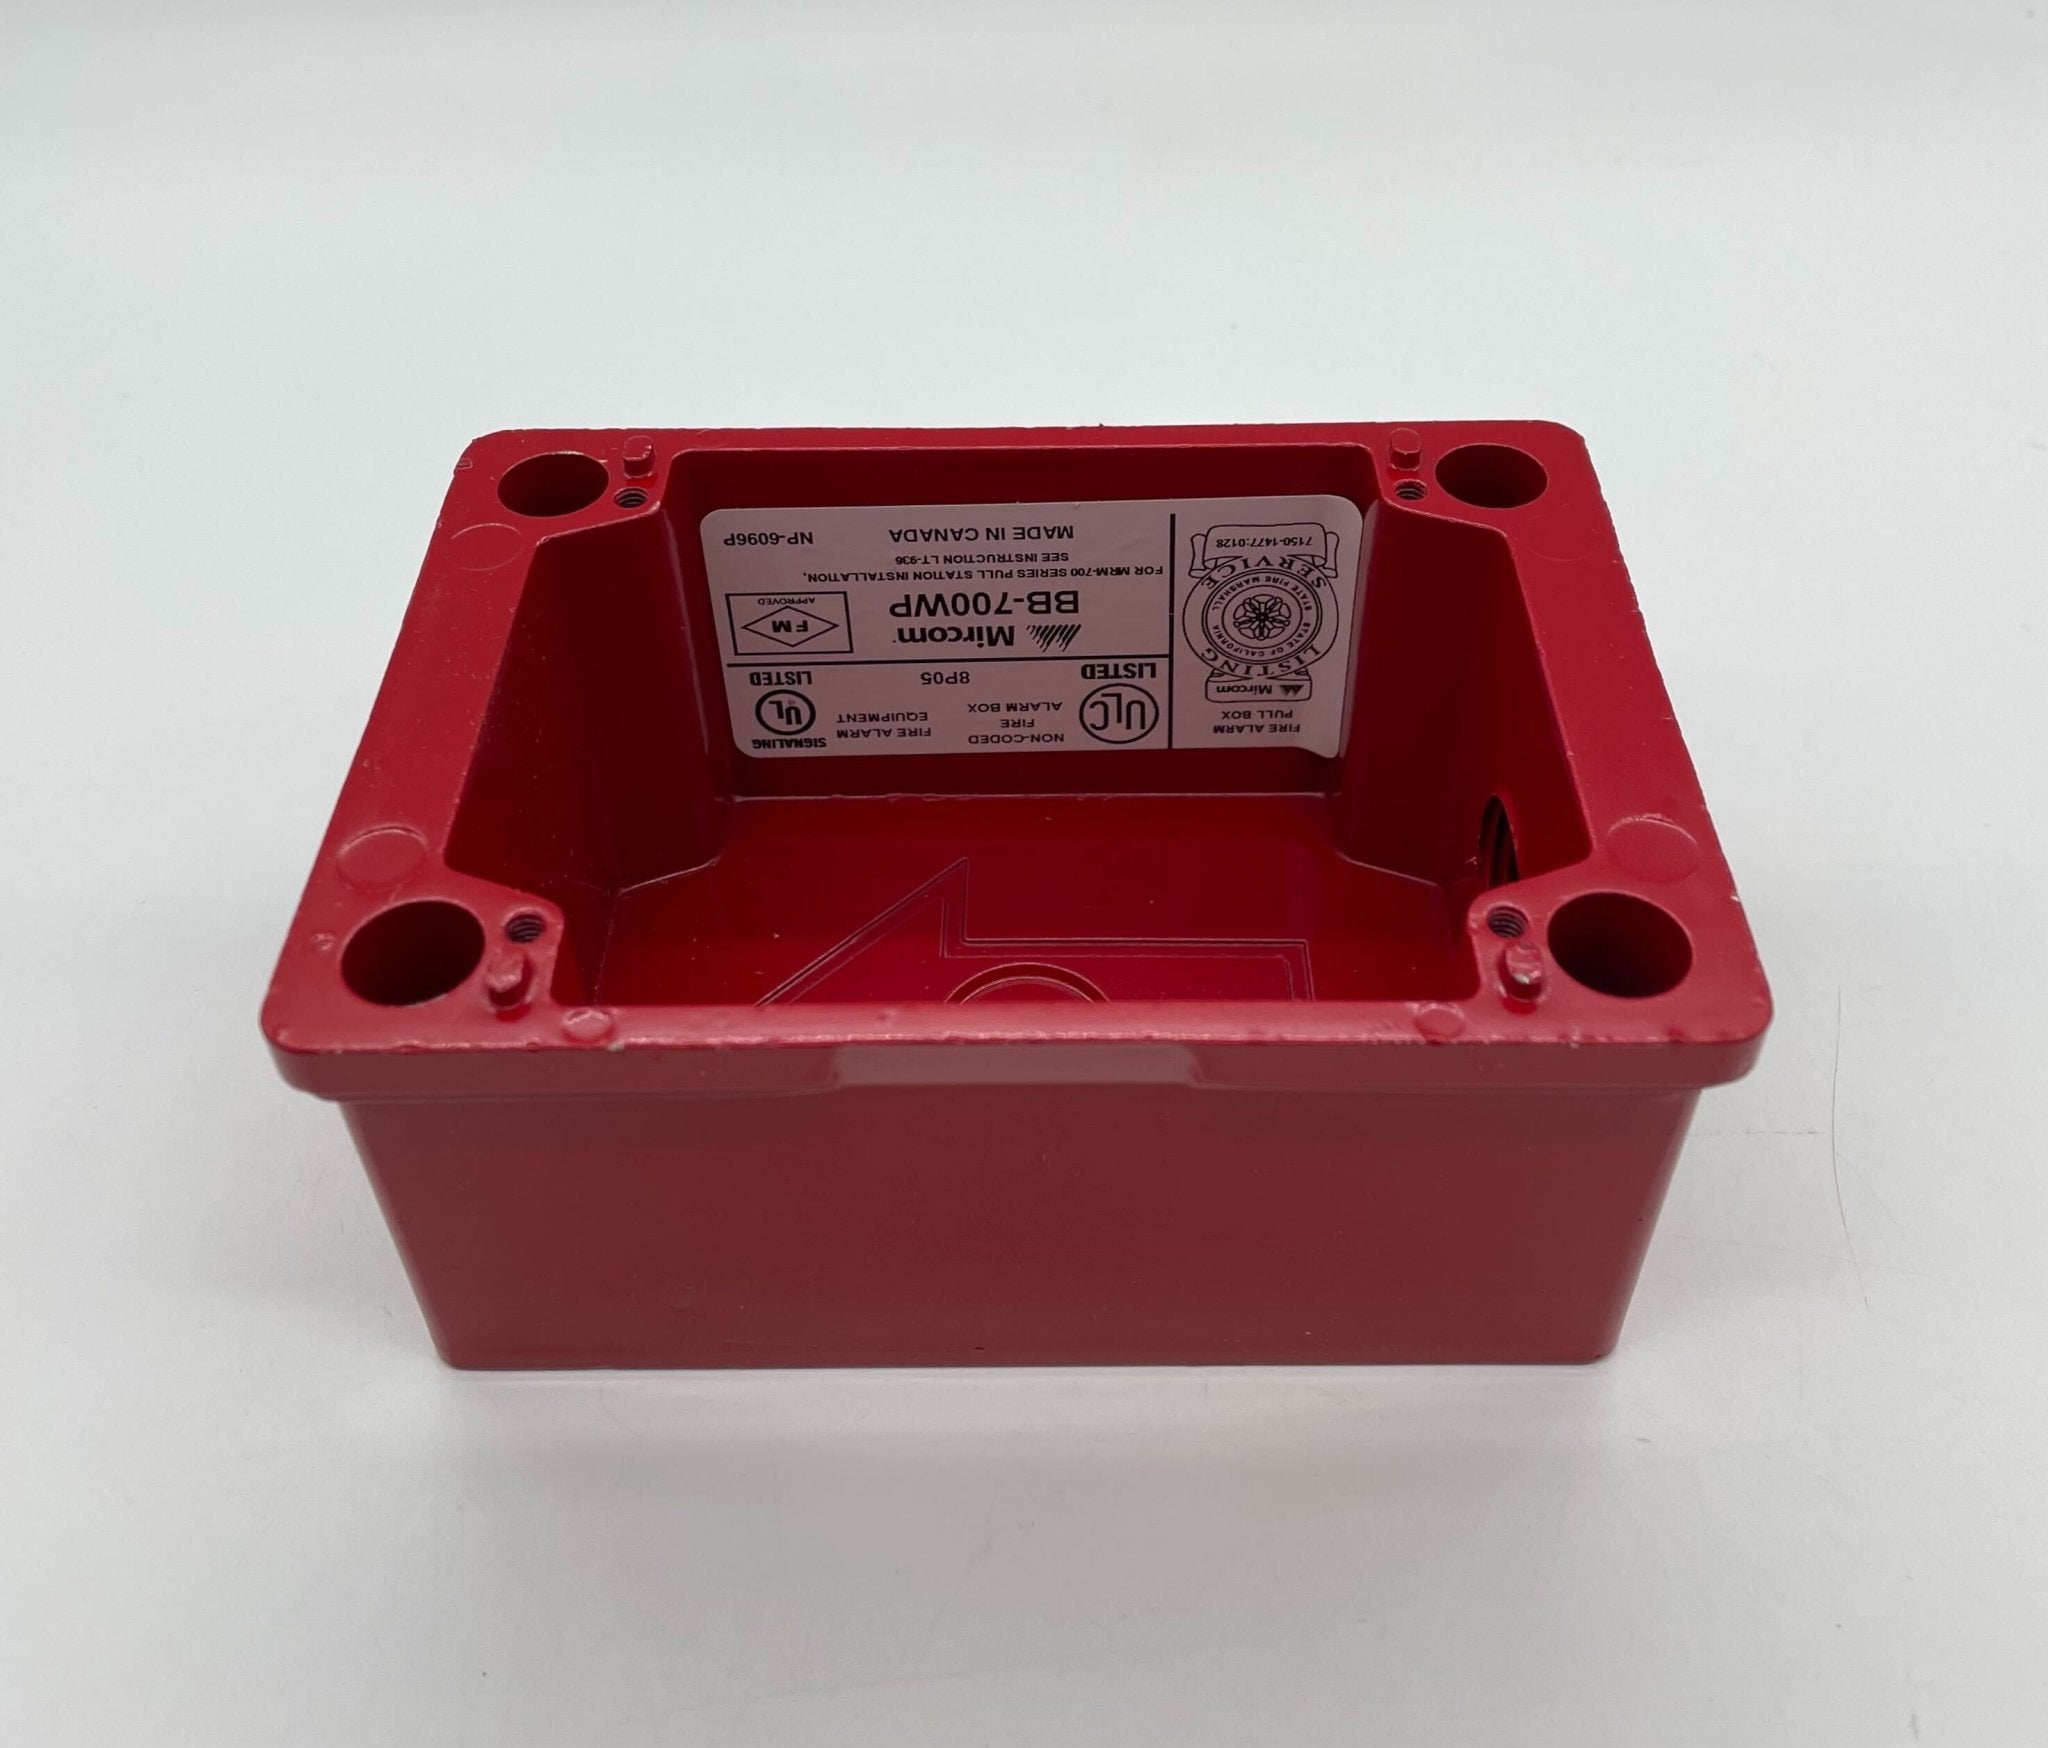 Mircom BB-700WP Weather Proof Surface Mount Box - The Fire Alarm Supplier